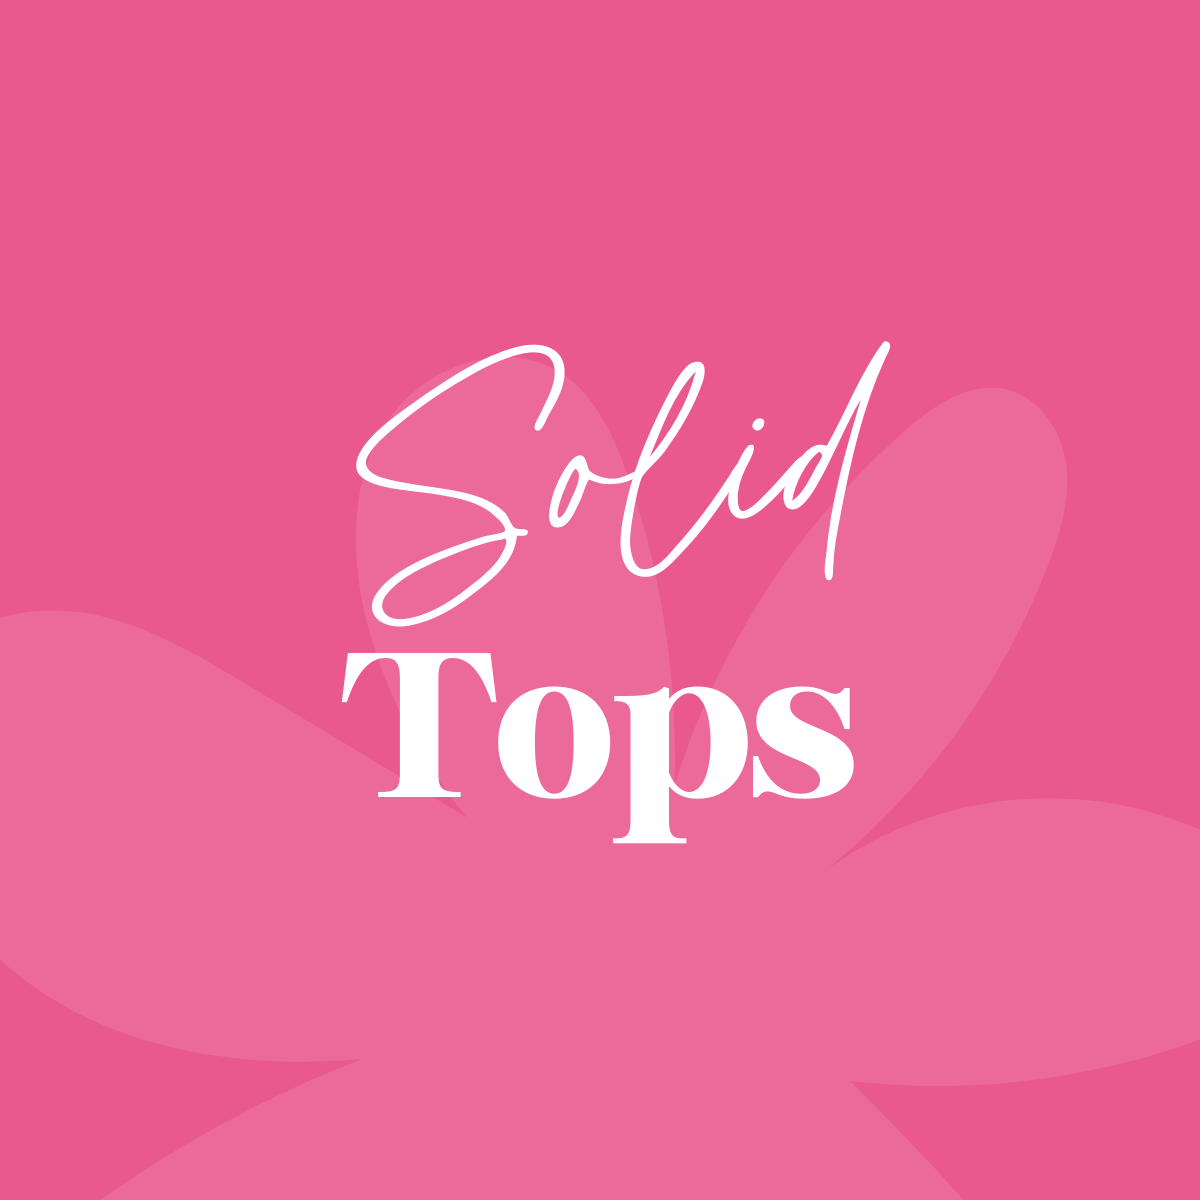 Solid Tops